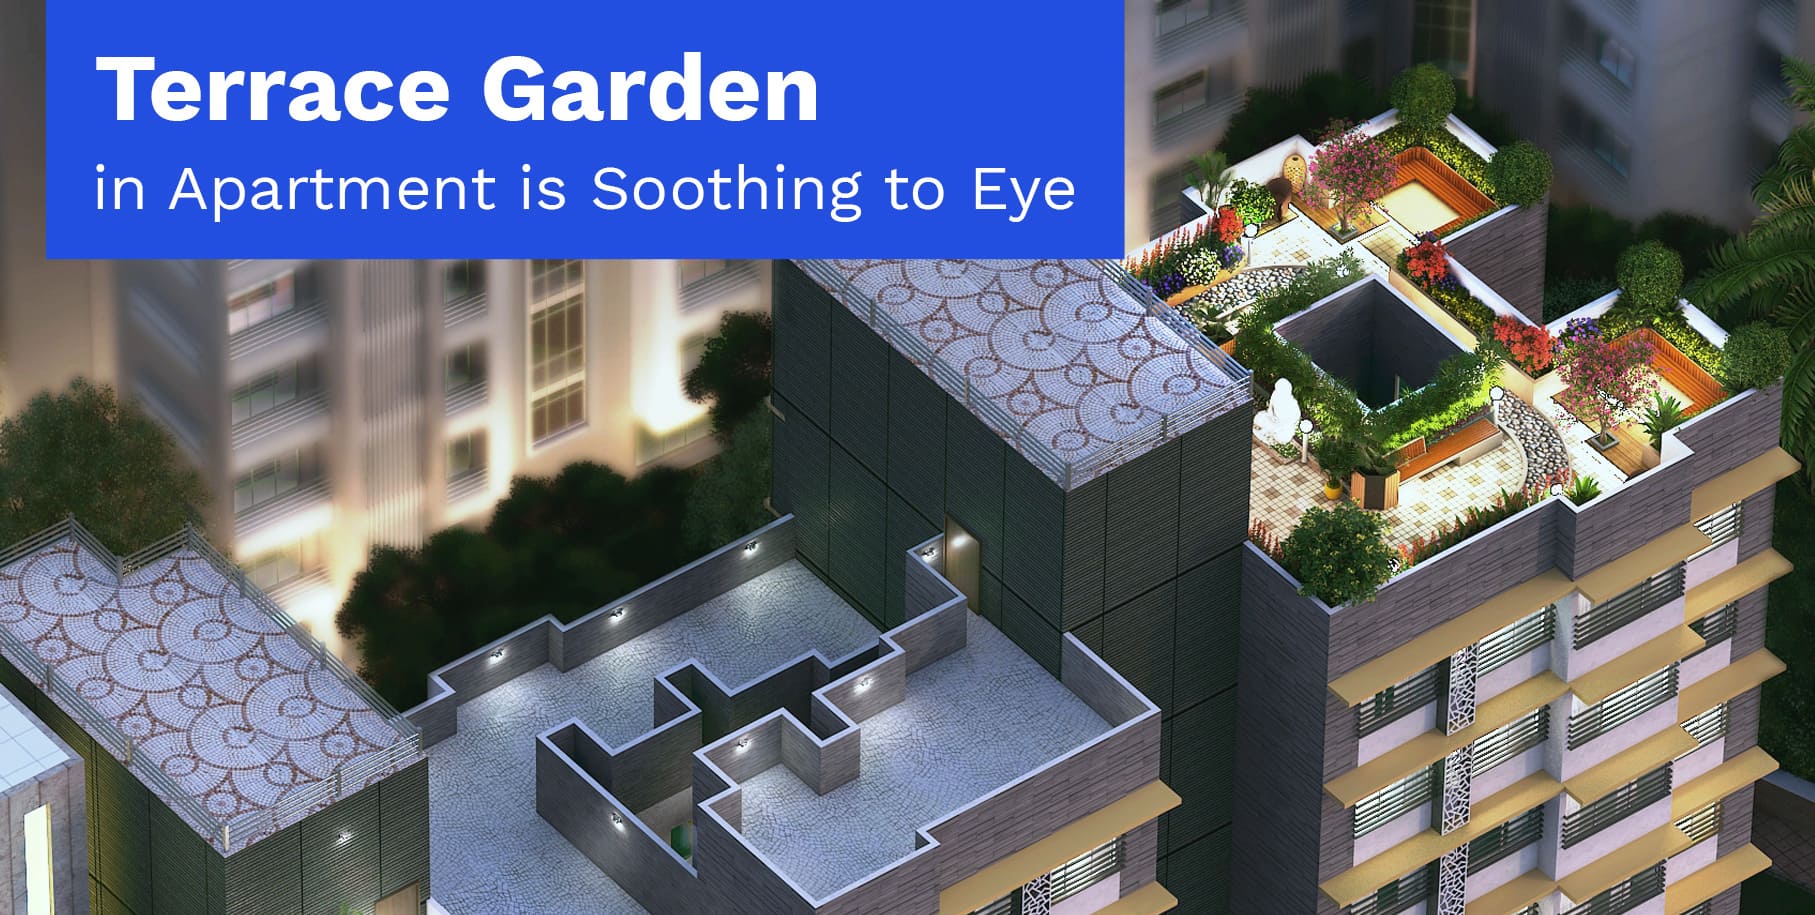 Terrace Garden in Apartments is soothing to Eye